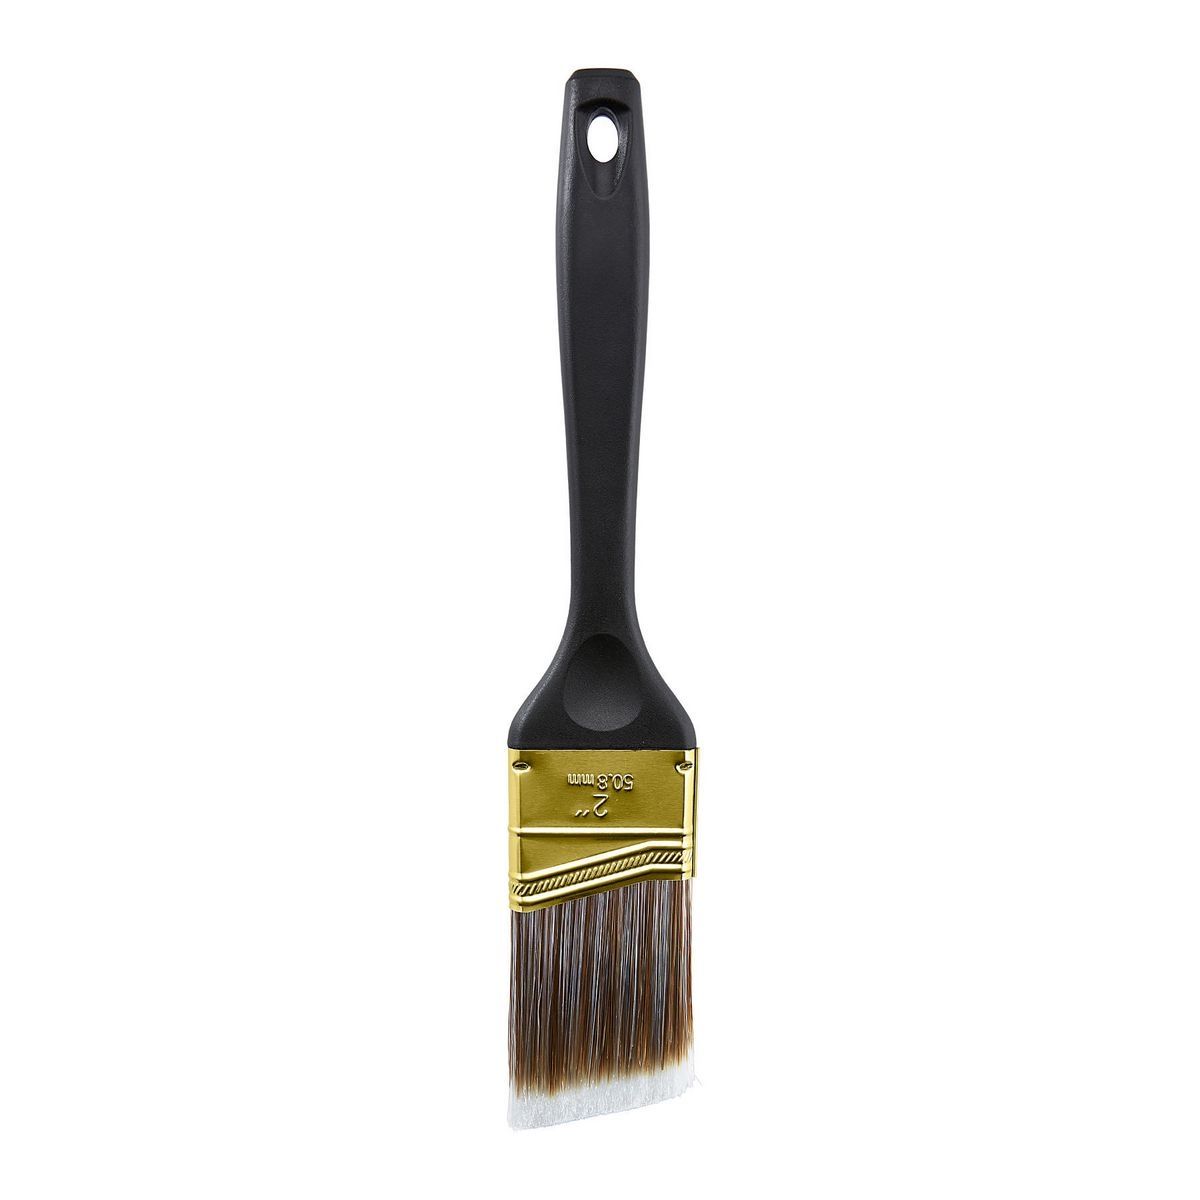 BLUE HAWK 2 in. Angle Paint Brush, GOOD Quality